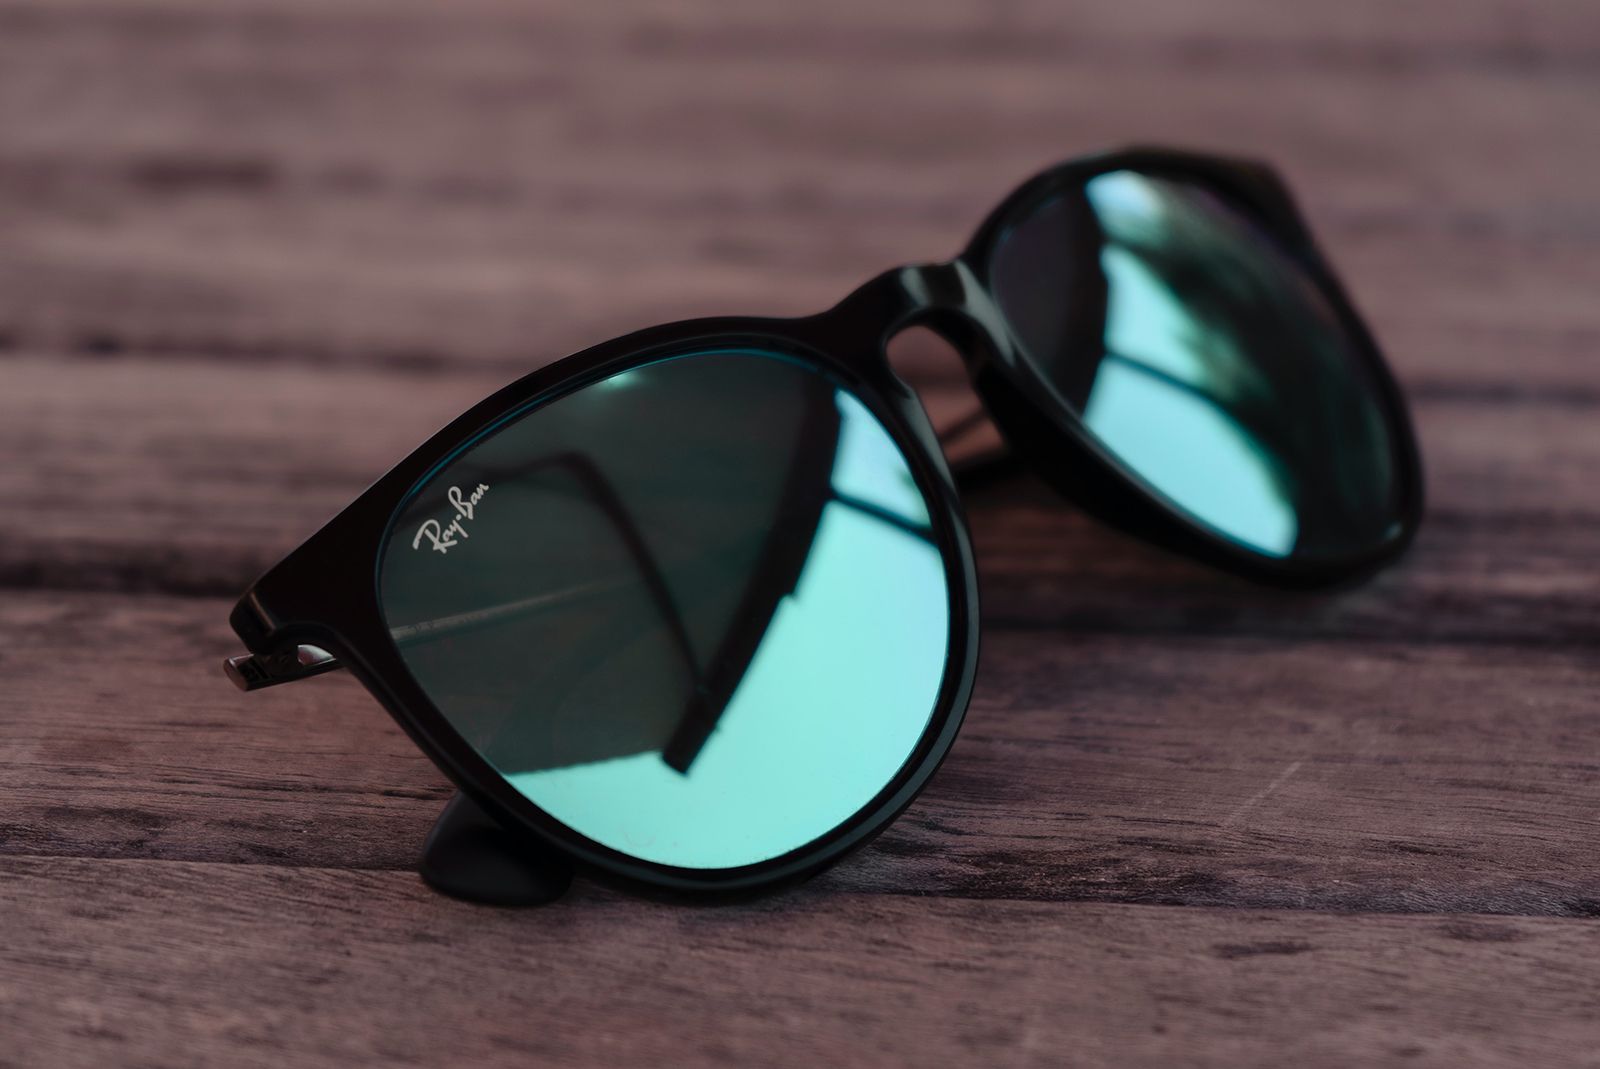 Facebook’s next hardware launch will be its Ray-Ban ‘smart glasses’ photo 2